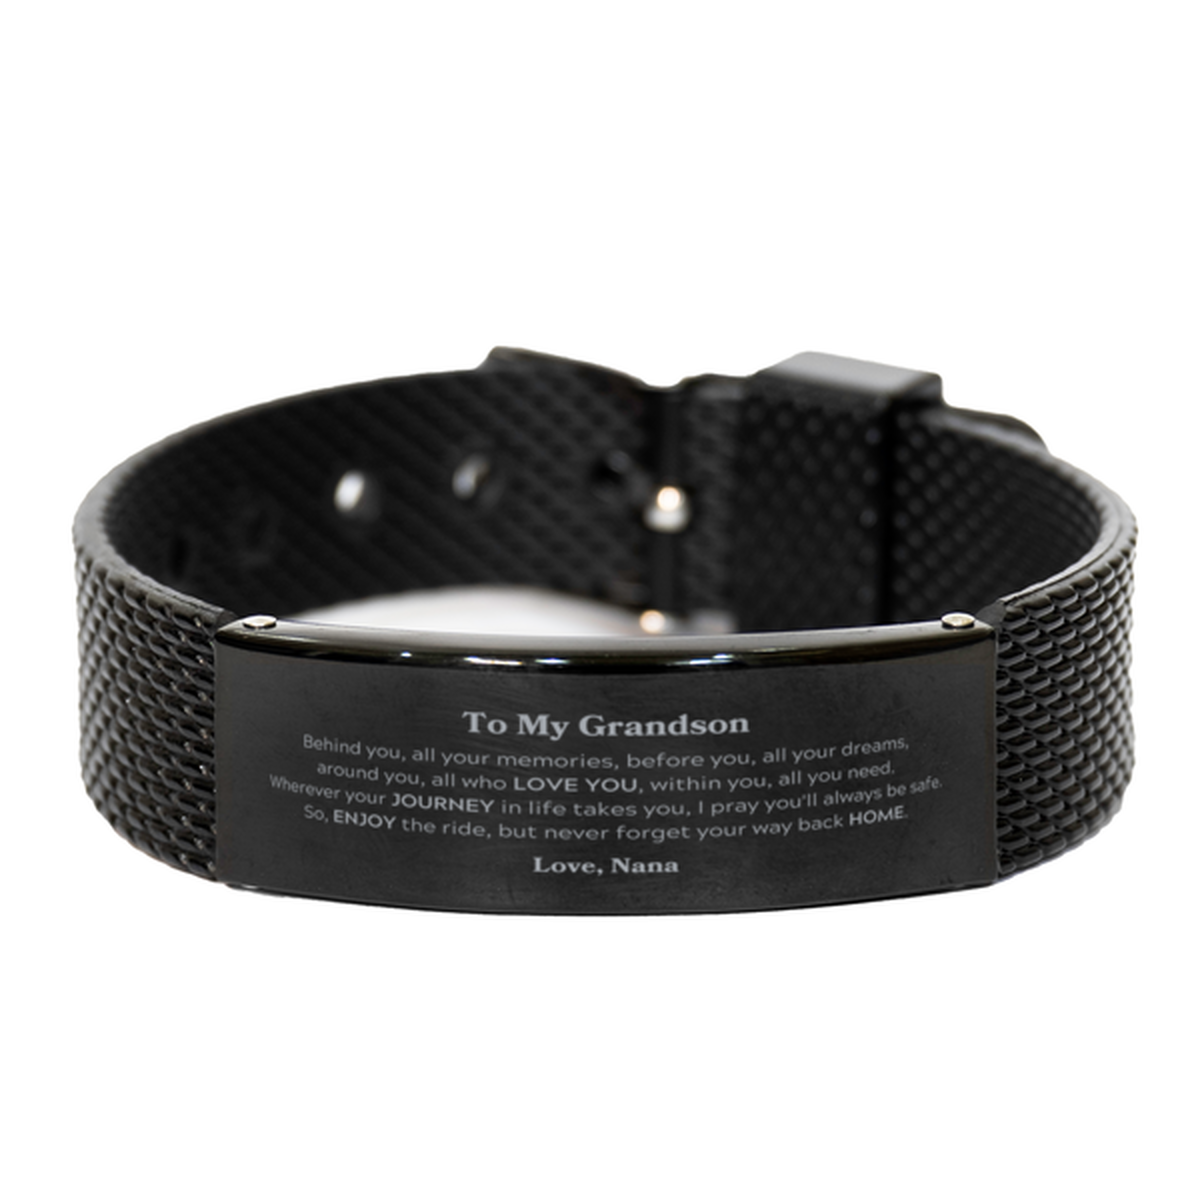 To My Grandson Graduation Gifts from Nana, Grandson Black Shark Mesh Bracelet Christmas Birthday Gifts for Grandson Behind you, all your memories, before you, all your dreams. Love, Nana